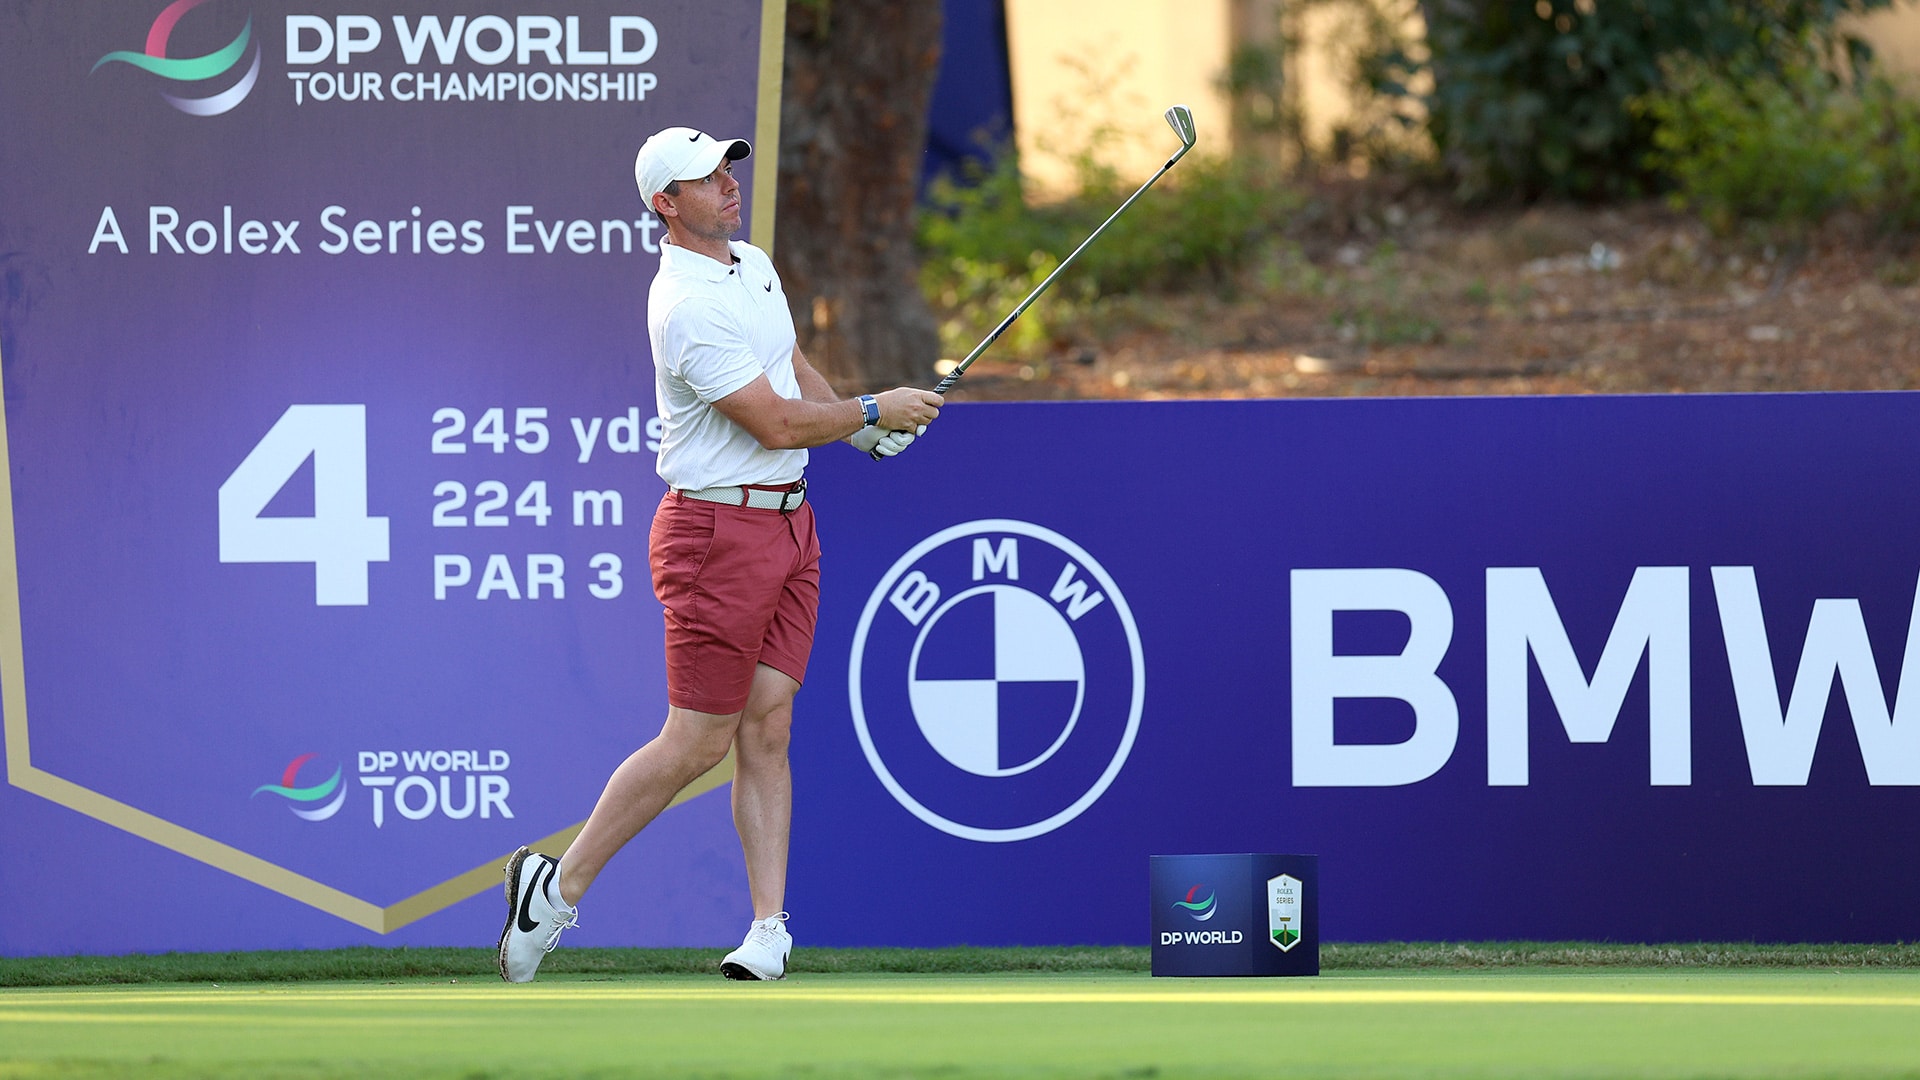 Rory McIlroy, Ryan Fox lead chase to end as DP World Tour’s No. 1 player